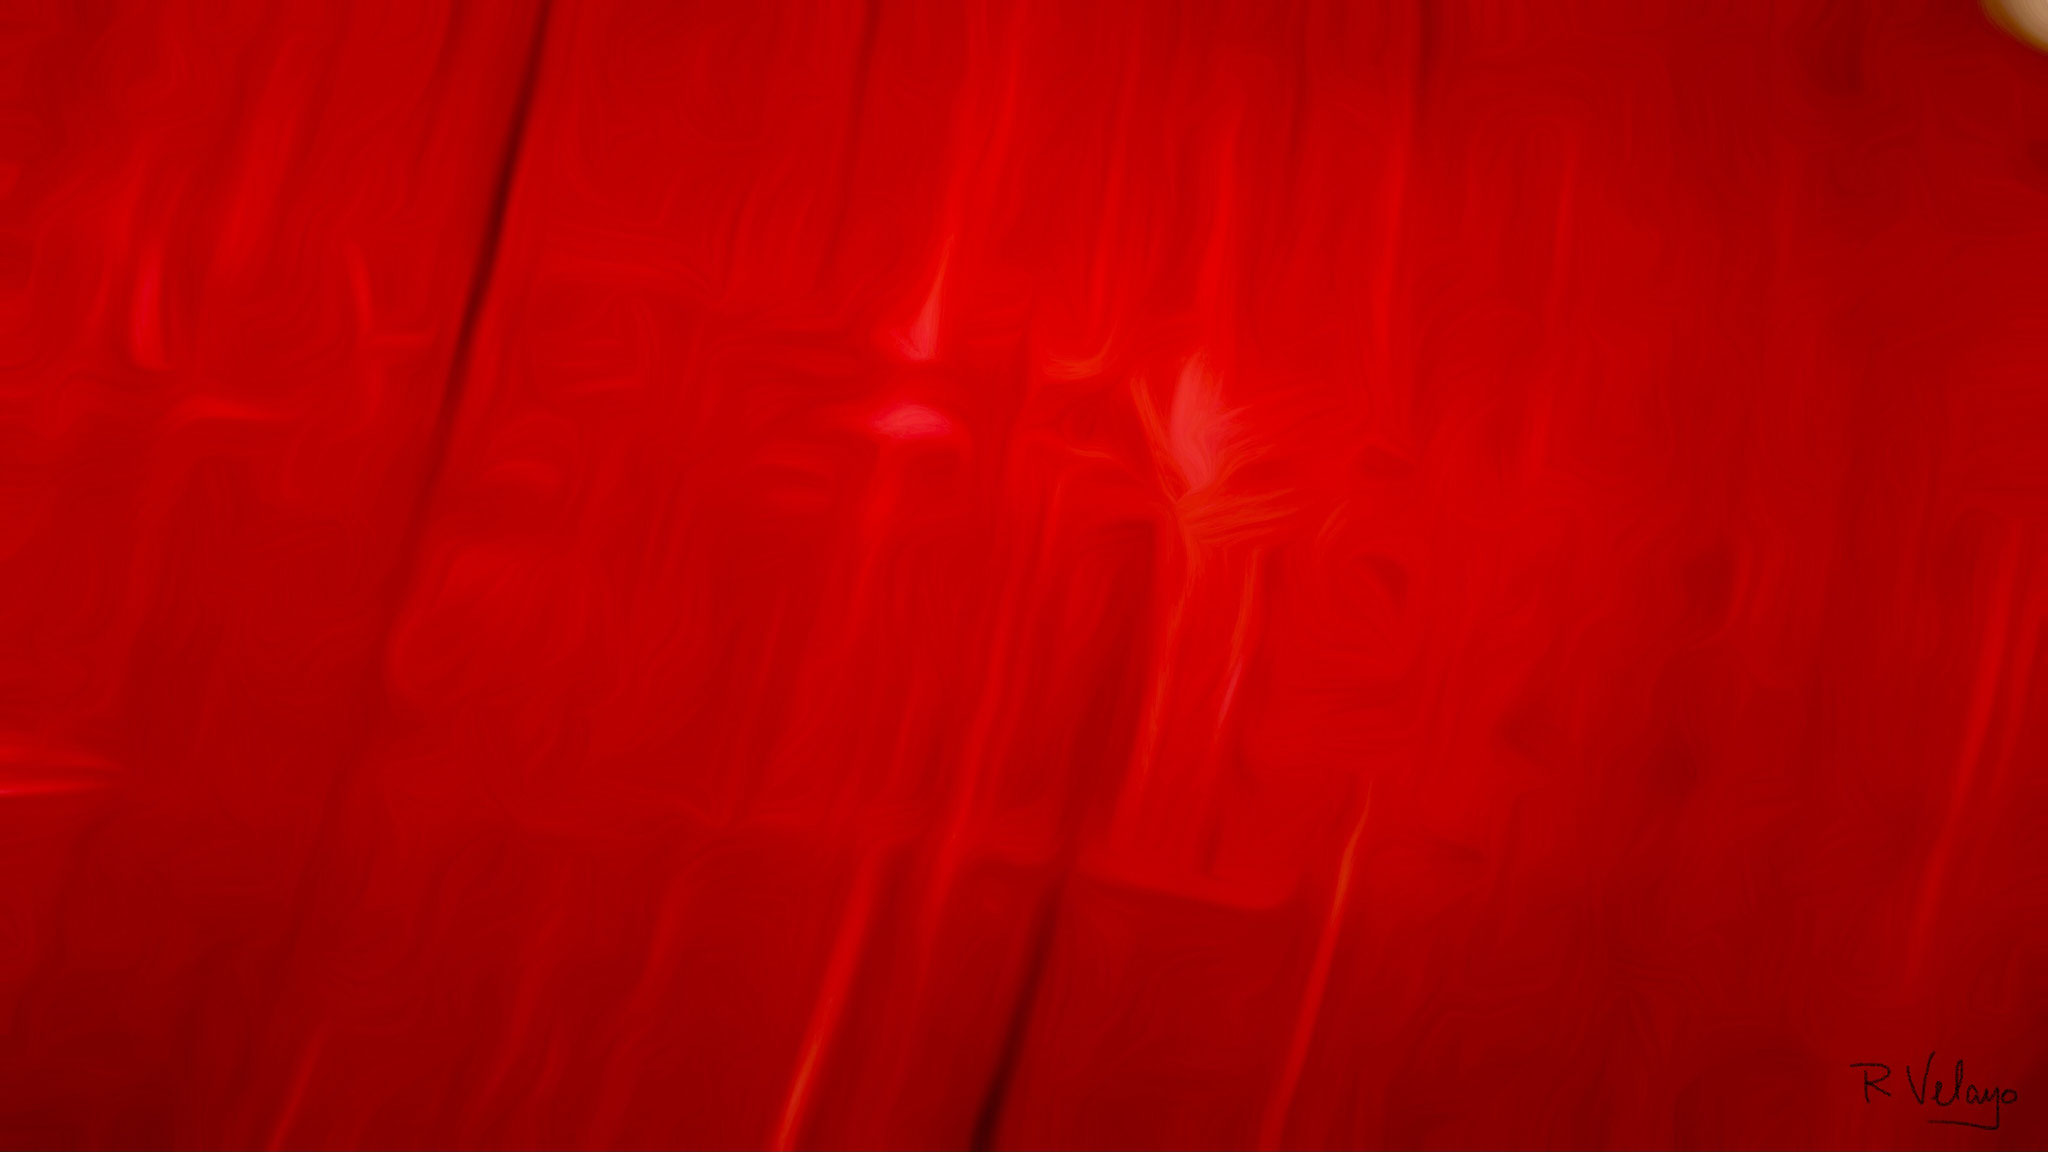 "LIGHT REFLECTIONS ON RED GLASS LAMP" [Created: 3/28/2022]